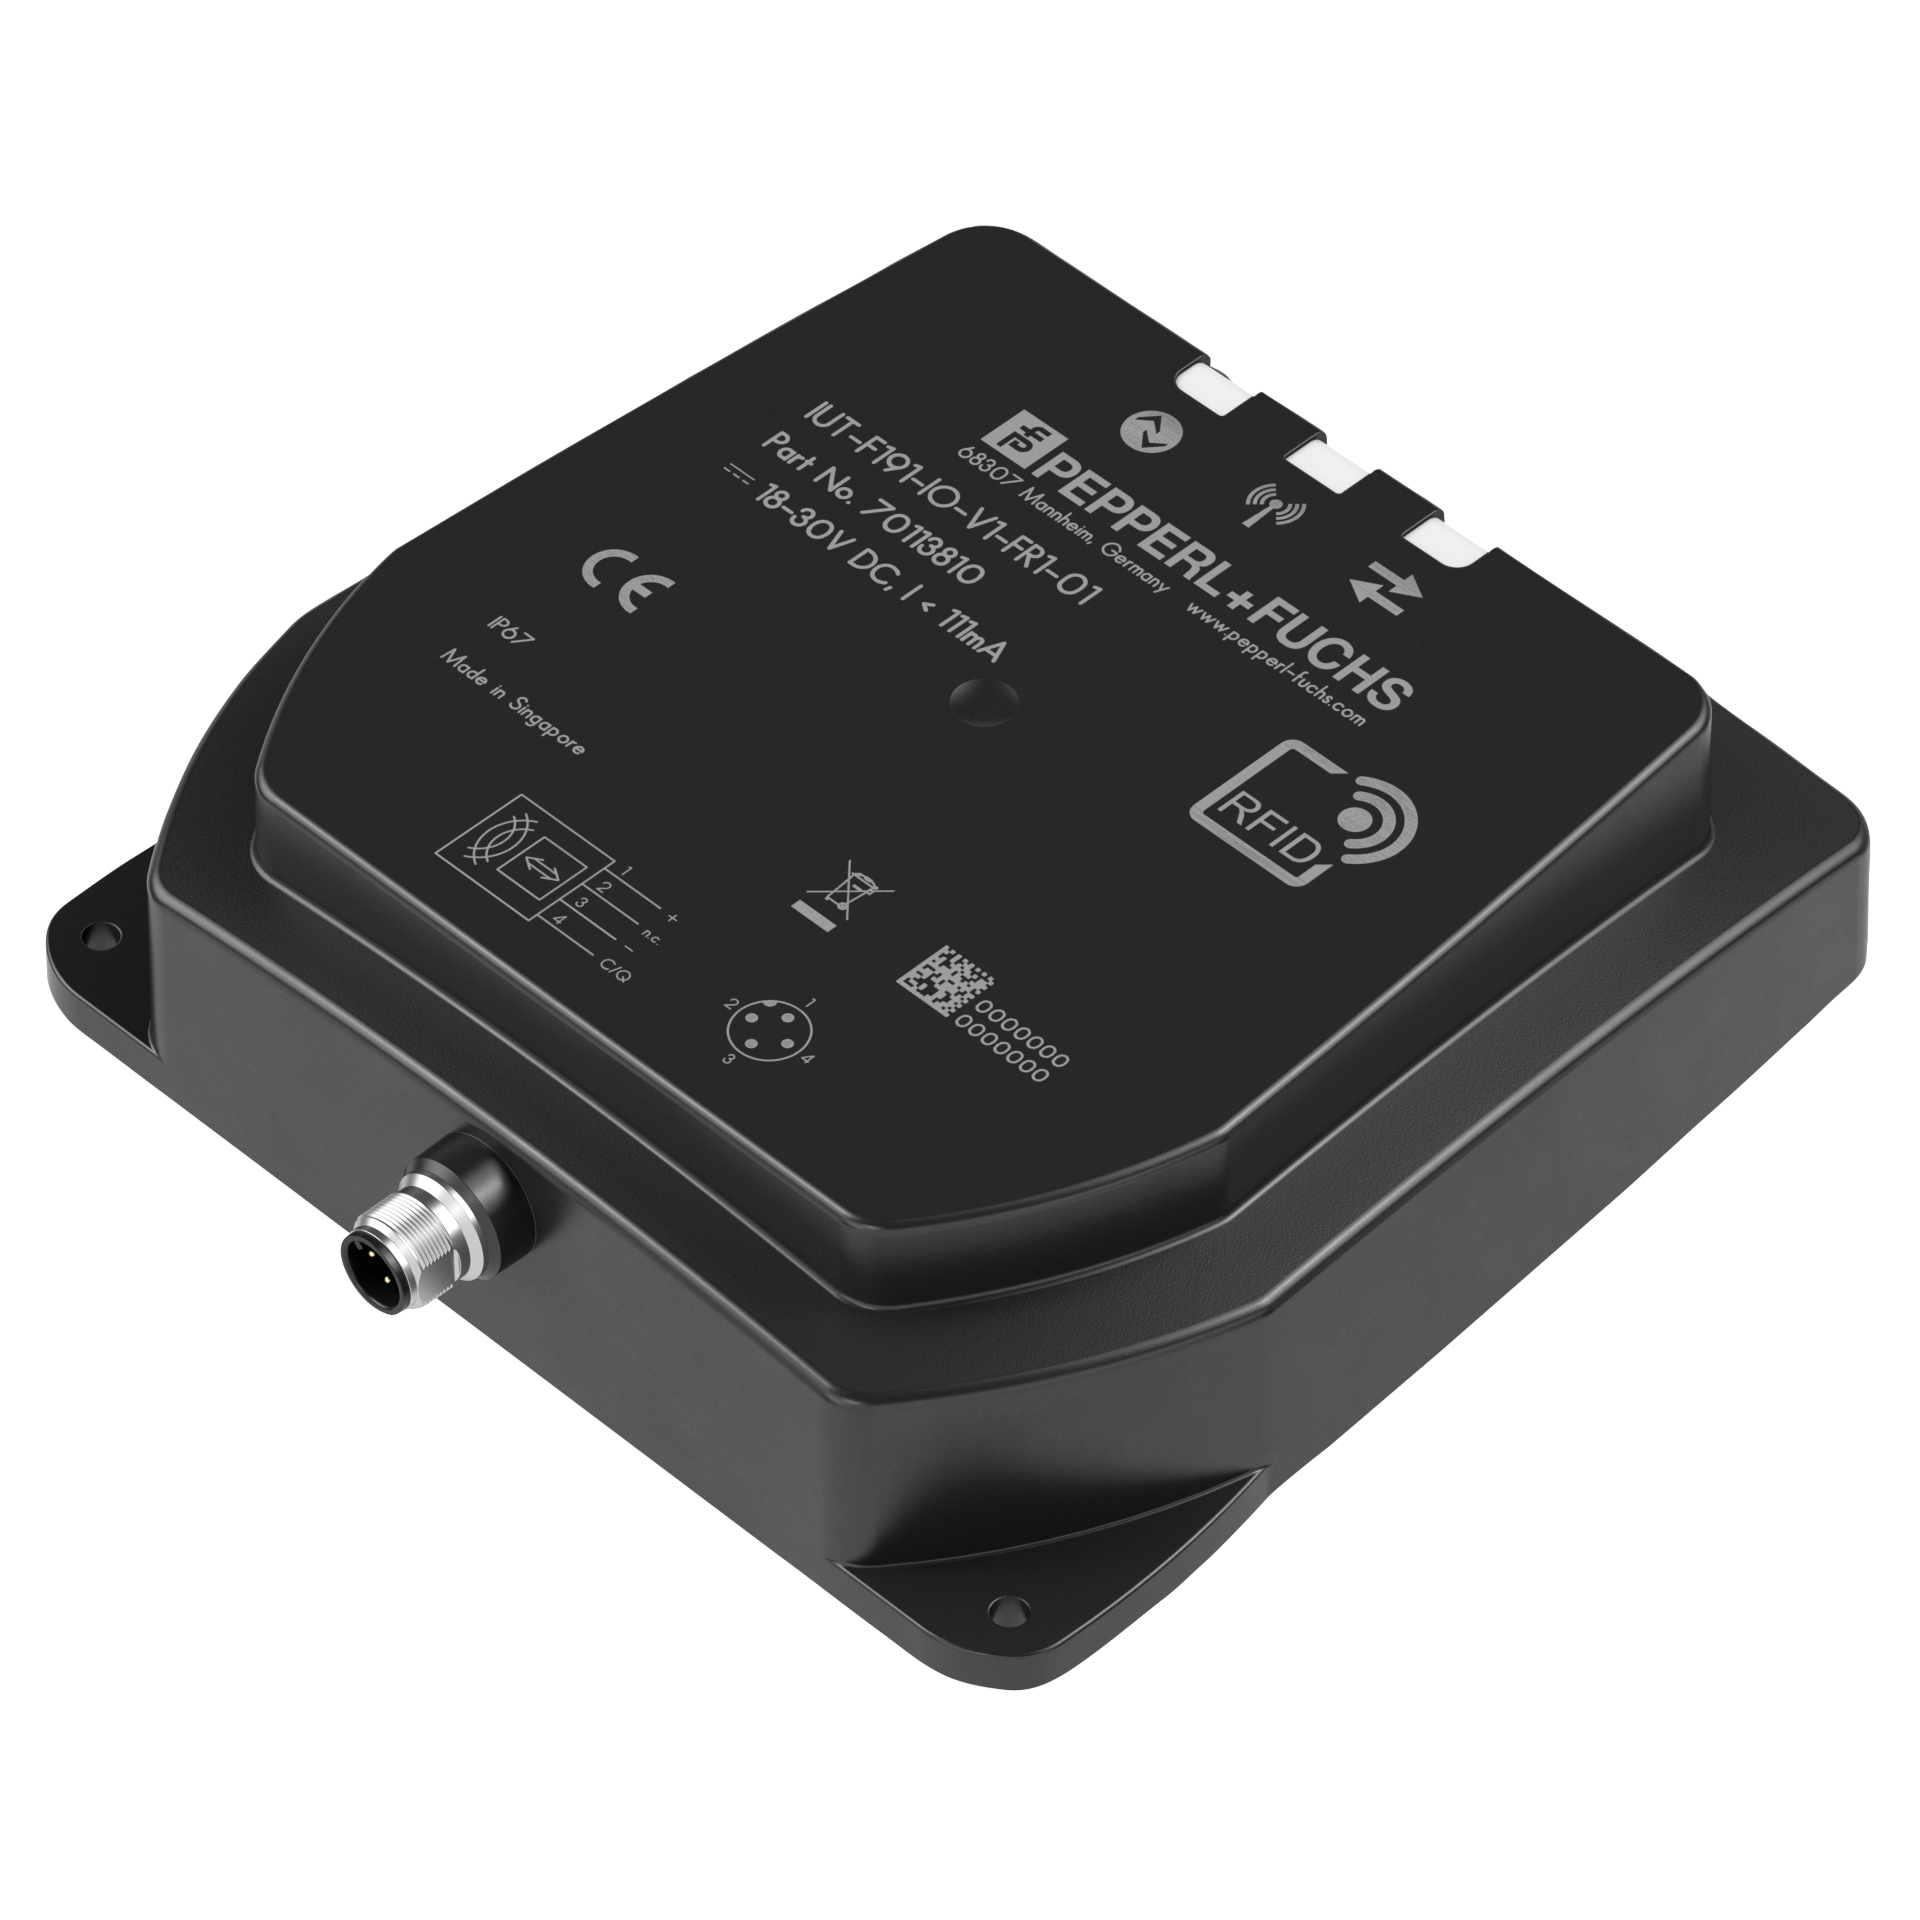 All-in-one: The F191 UHF RFID read/write device covers a wide range of applications in a cost-effective manner.